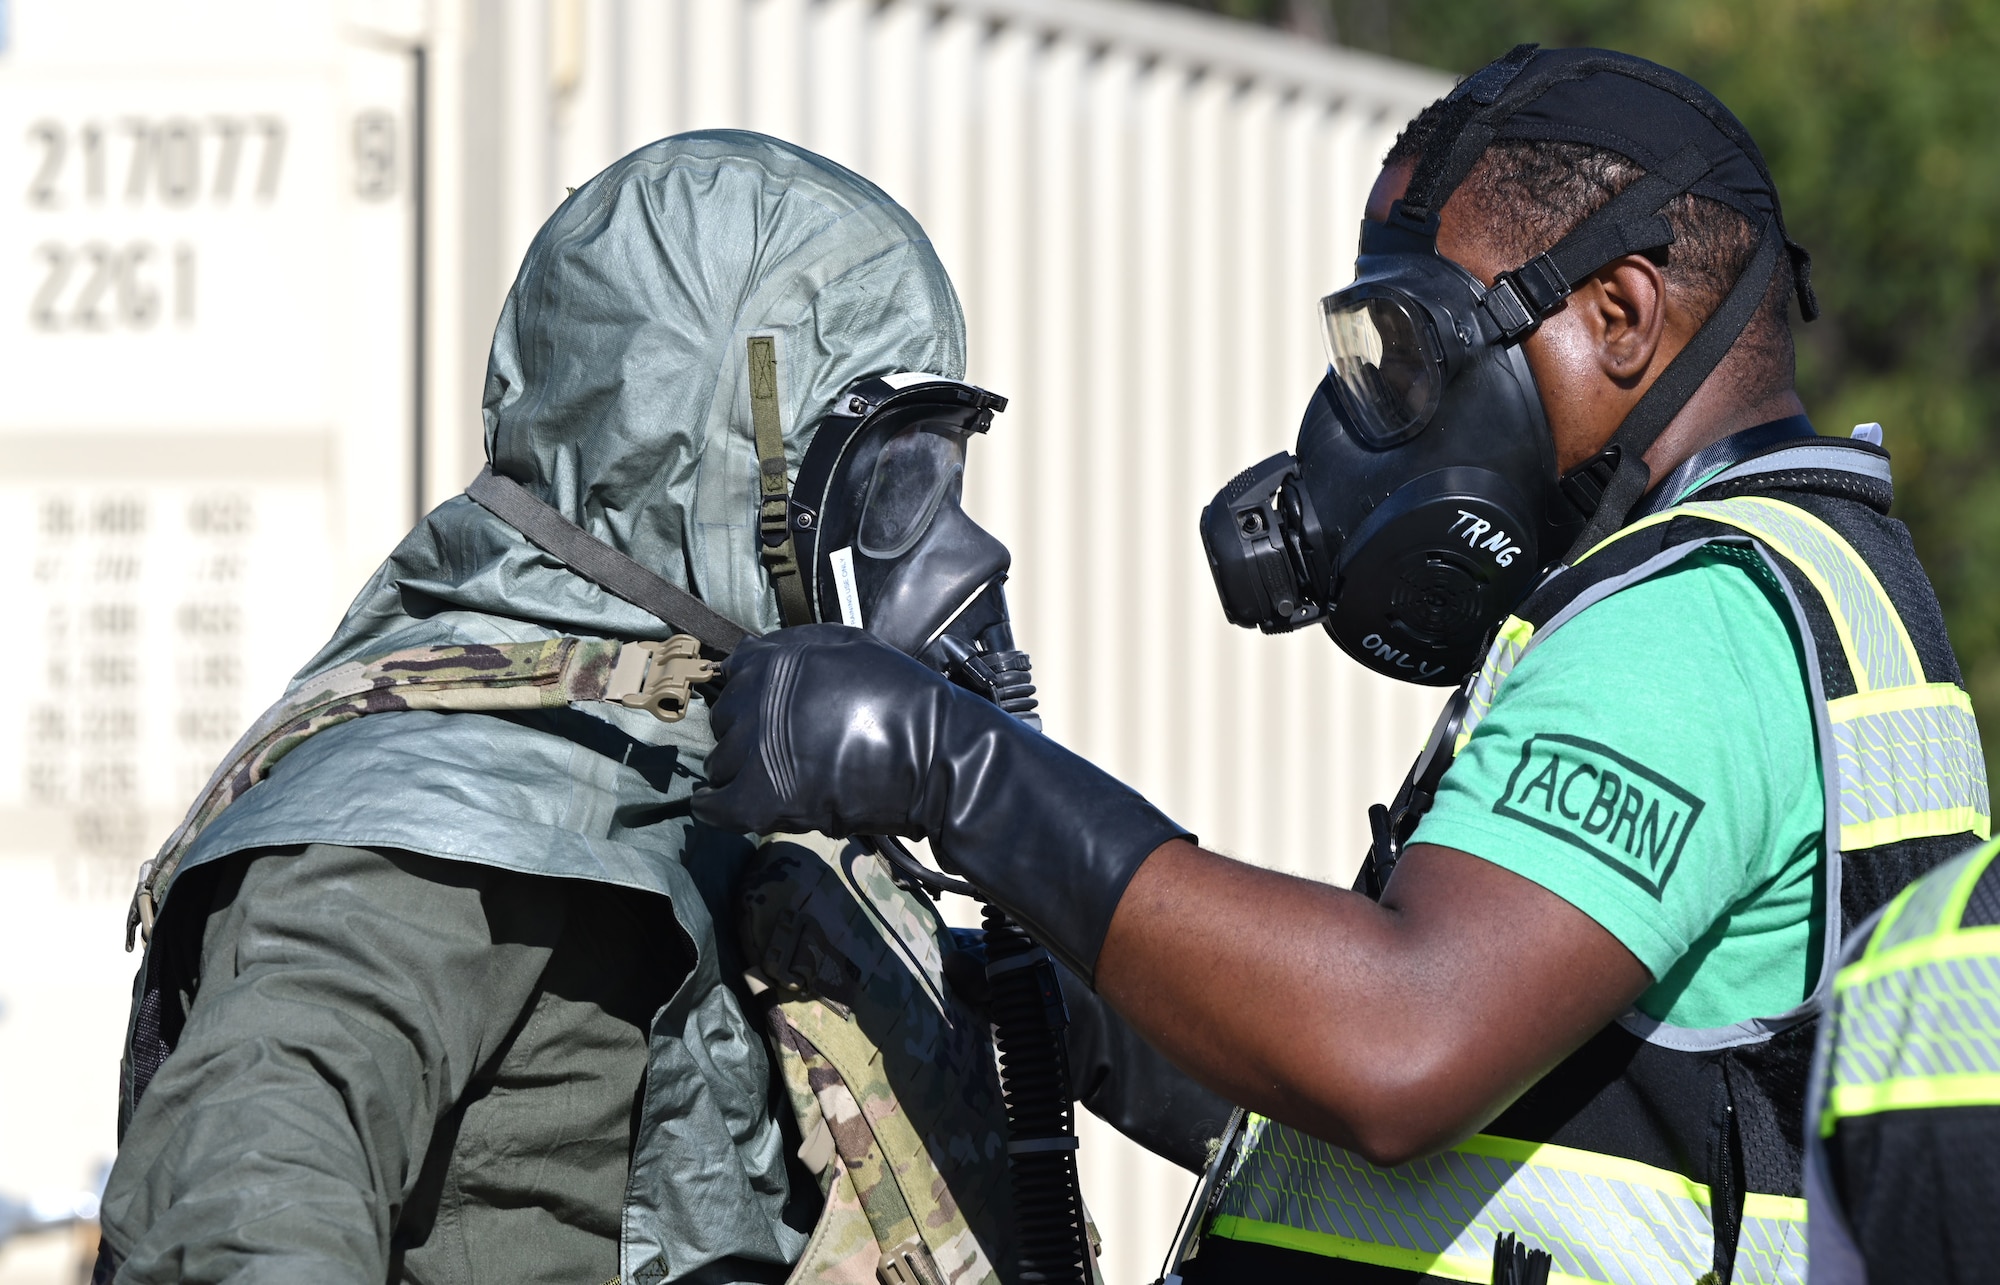 Toxic Pineapple II arms Joint Force AFE teams CBRN defense training